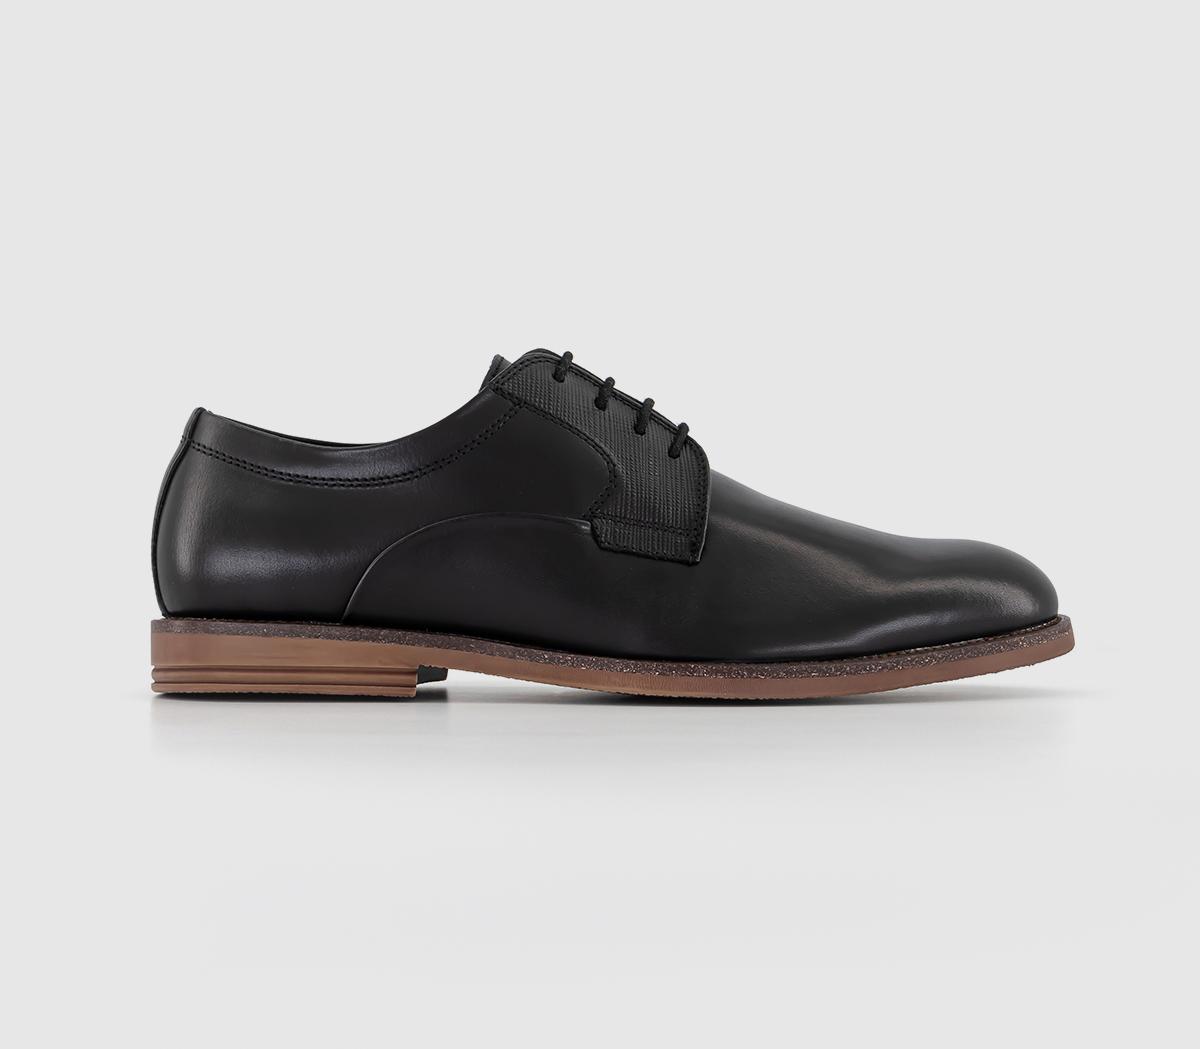 OFFICE Matteo Embossed Flexi Sole Derby Shoes Black Leather - Derby Shoes